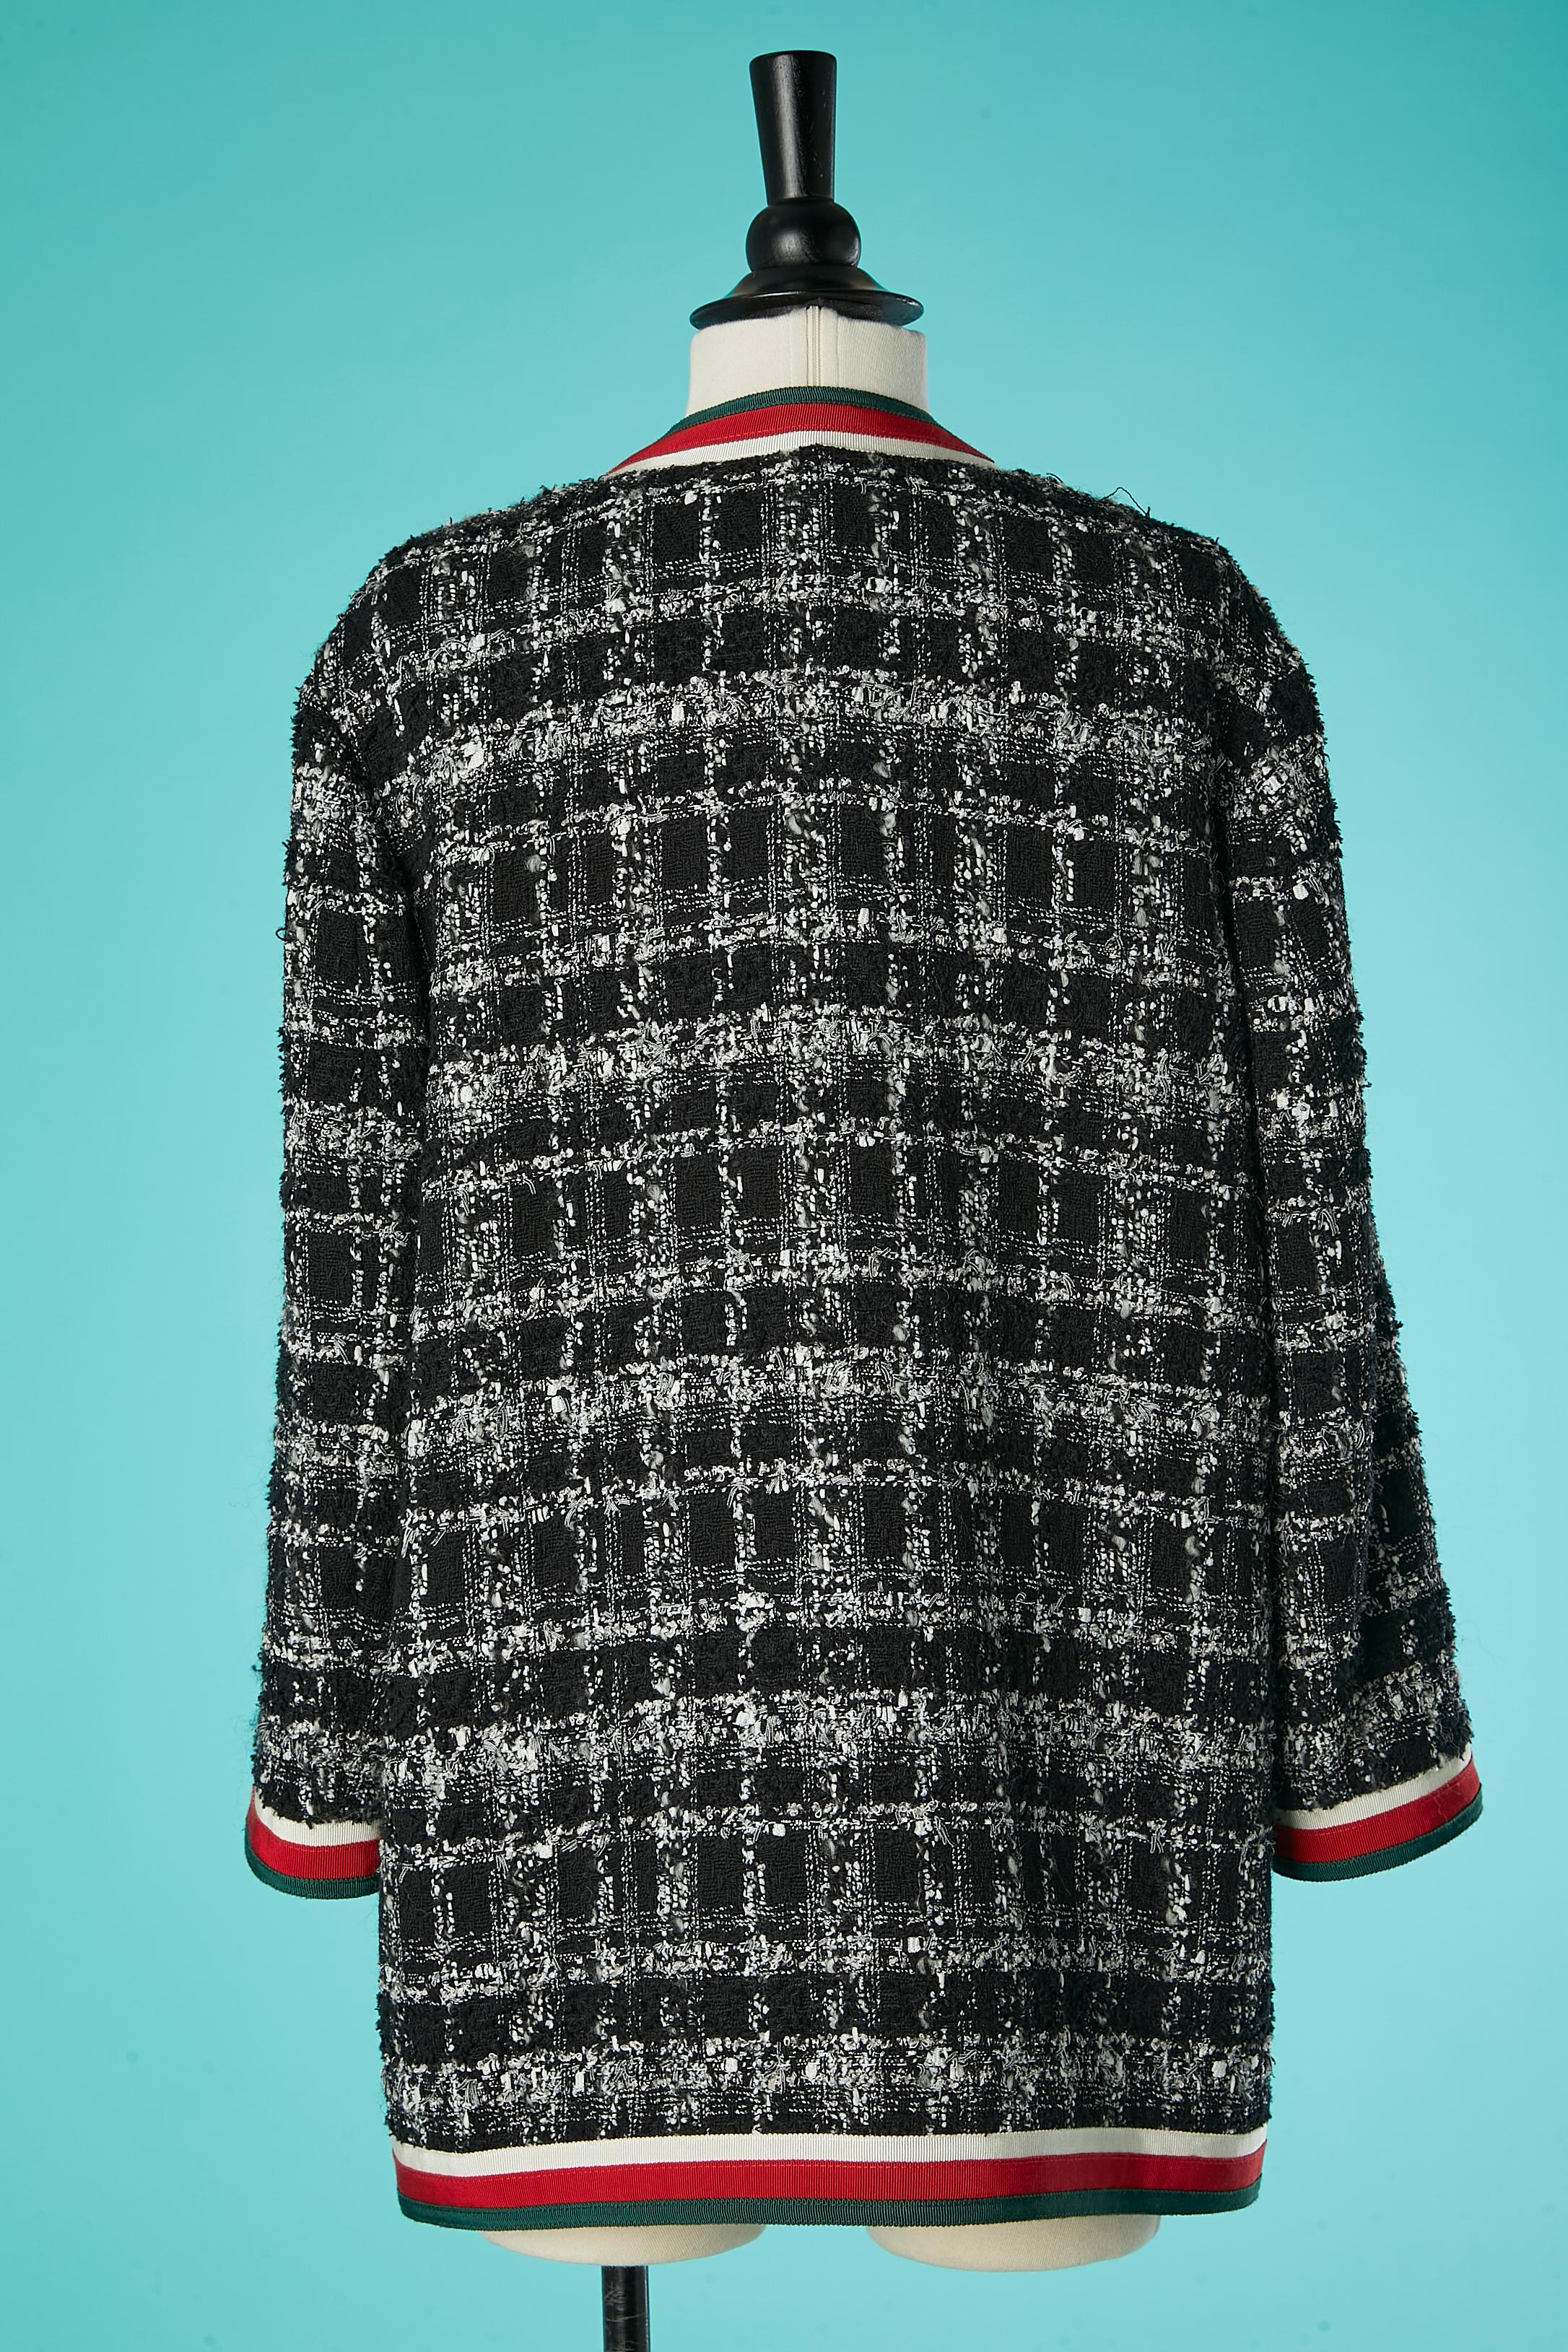 Tweed jacket with white, red & green trimming Gucci by Alessandro Michele 2019 For Sale 1